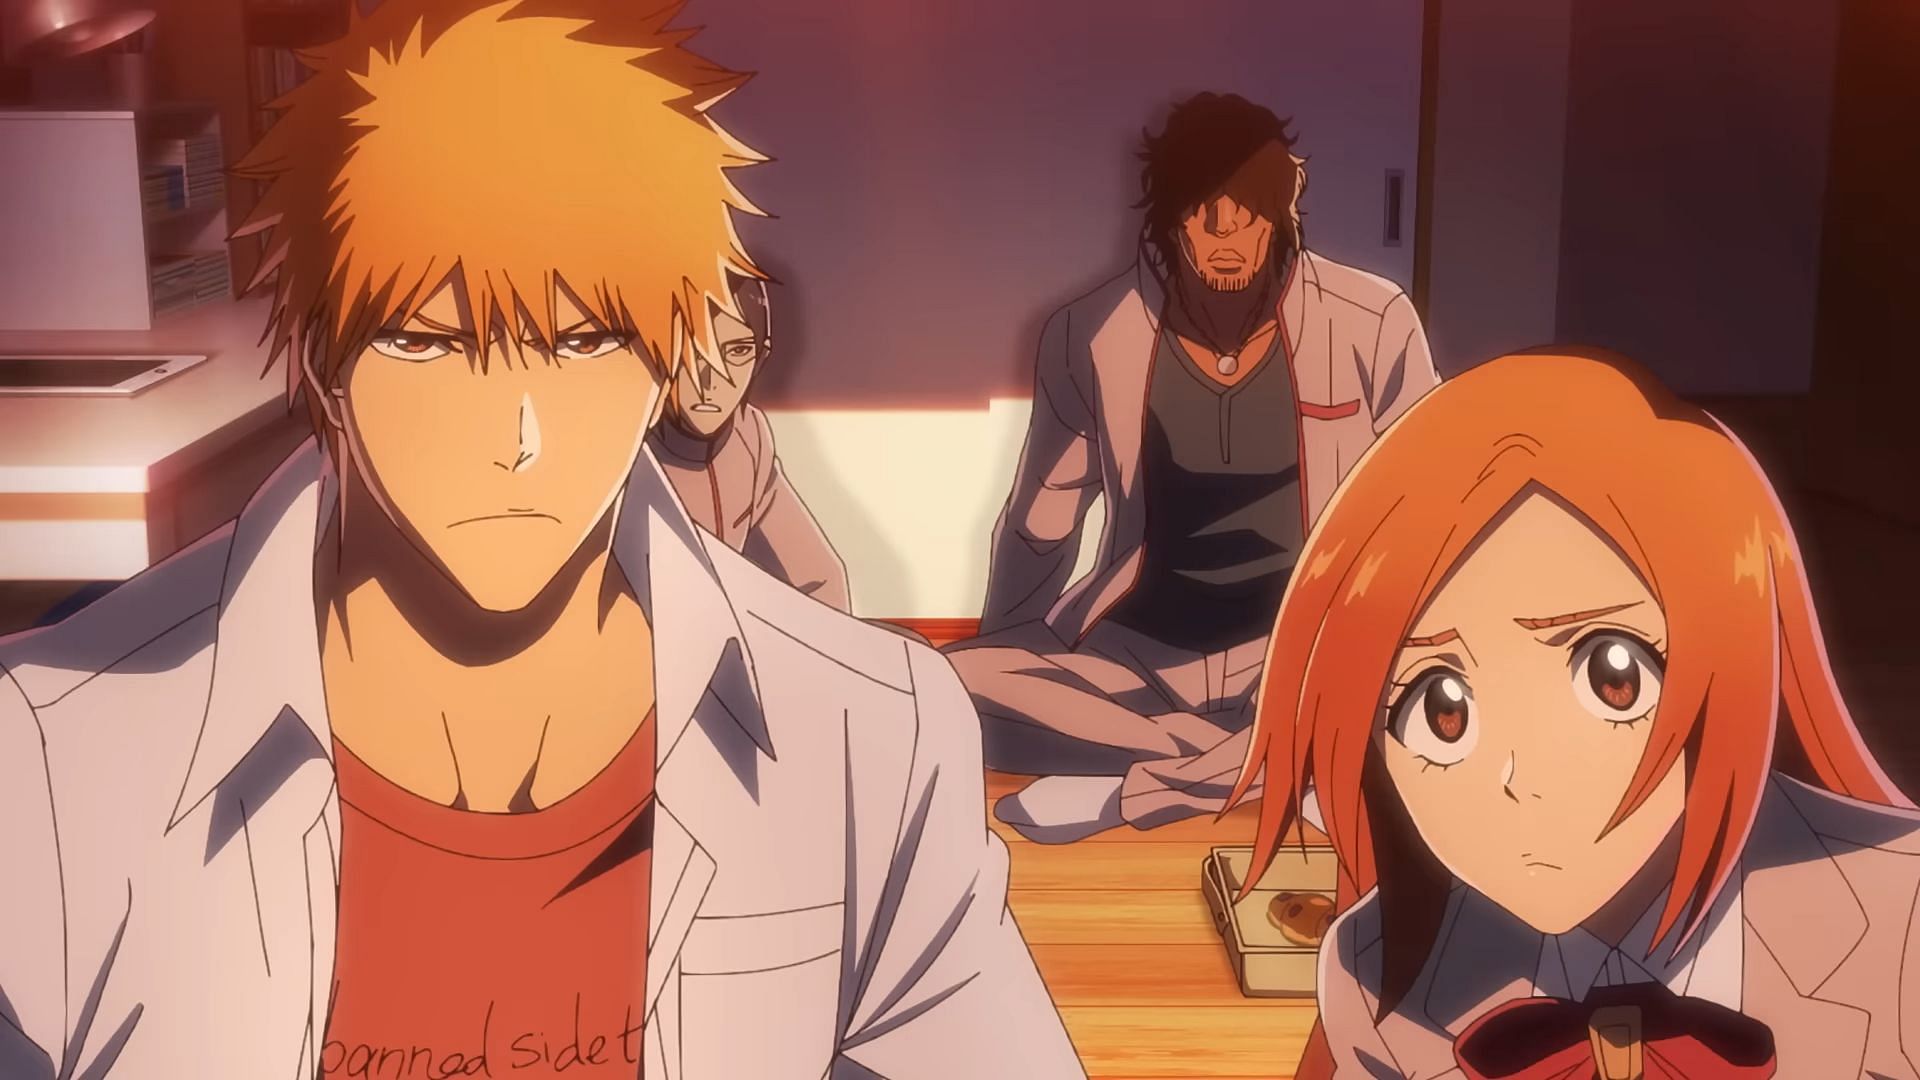 Bleach: Thousand-Year Blood War episode 1 premiere exceeds expectations at  New York Comic Con